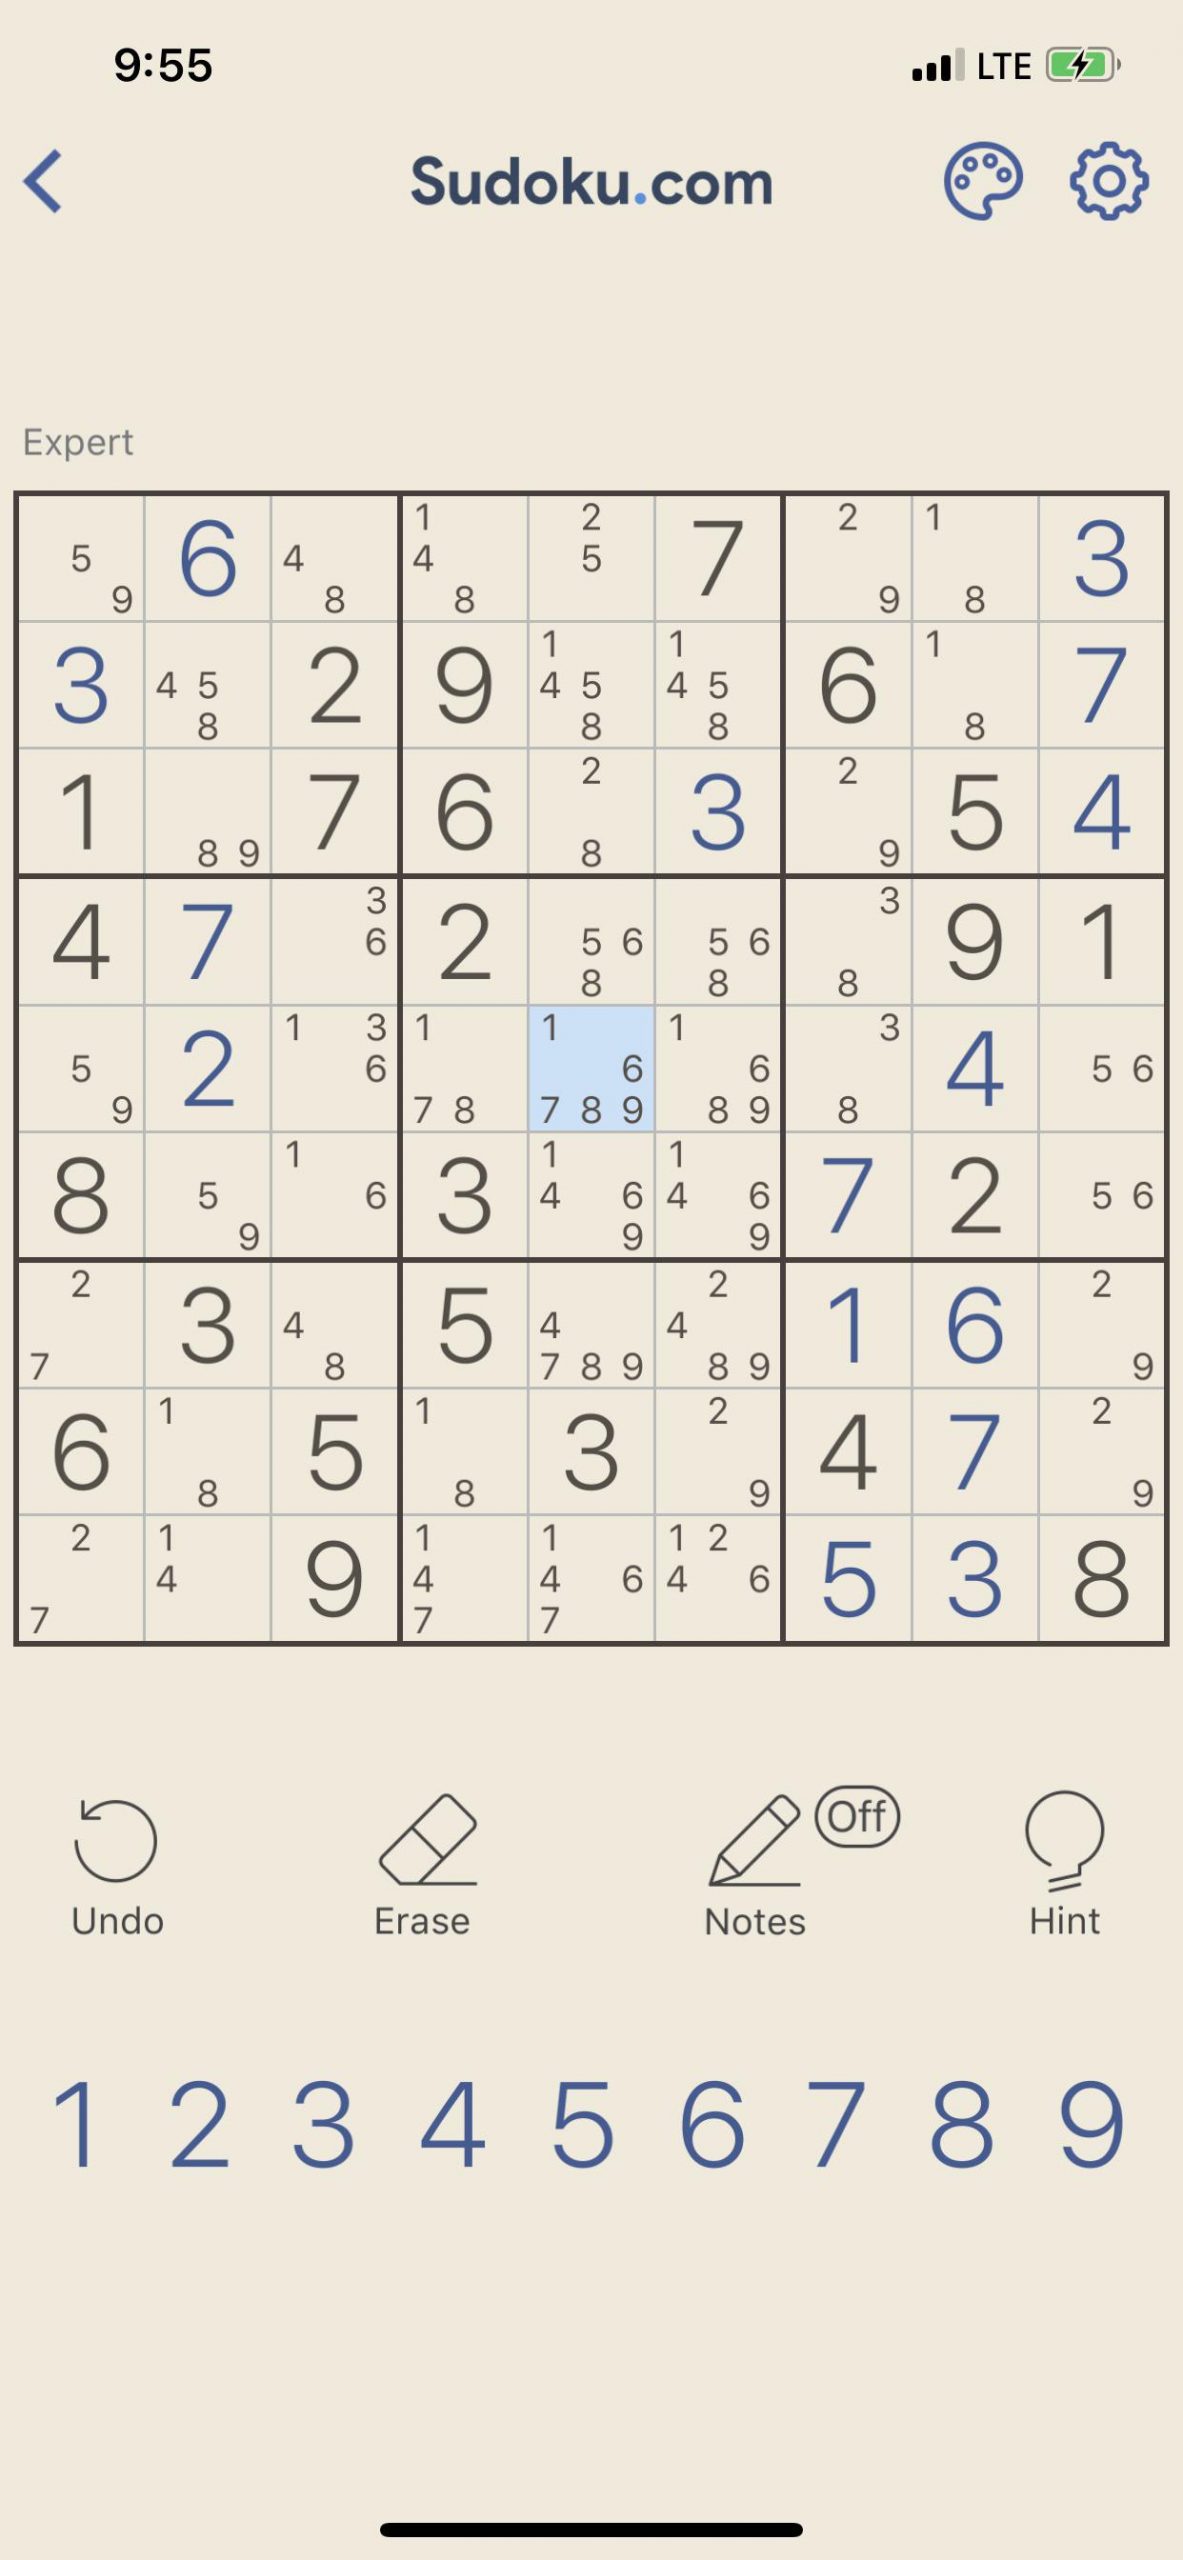 Probably The Hardest Sudoku Puzzle I&amp;#039;ve Ever Played. Me And